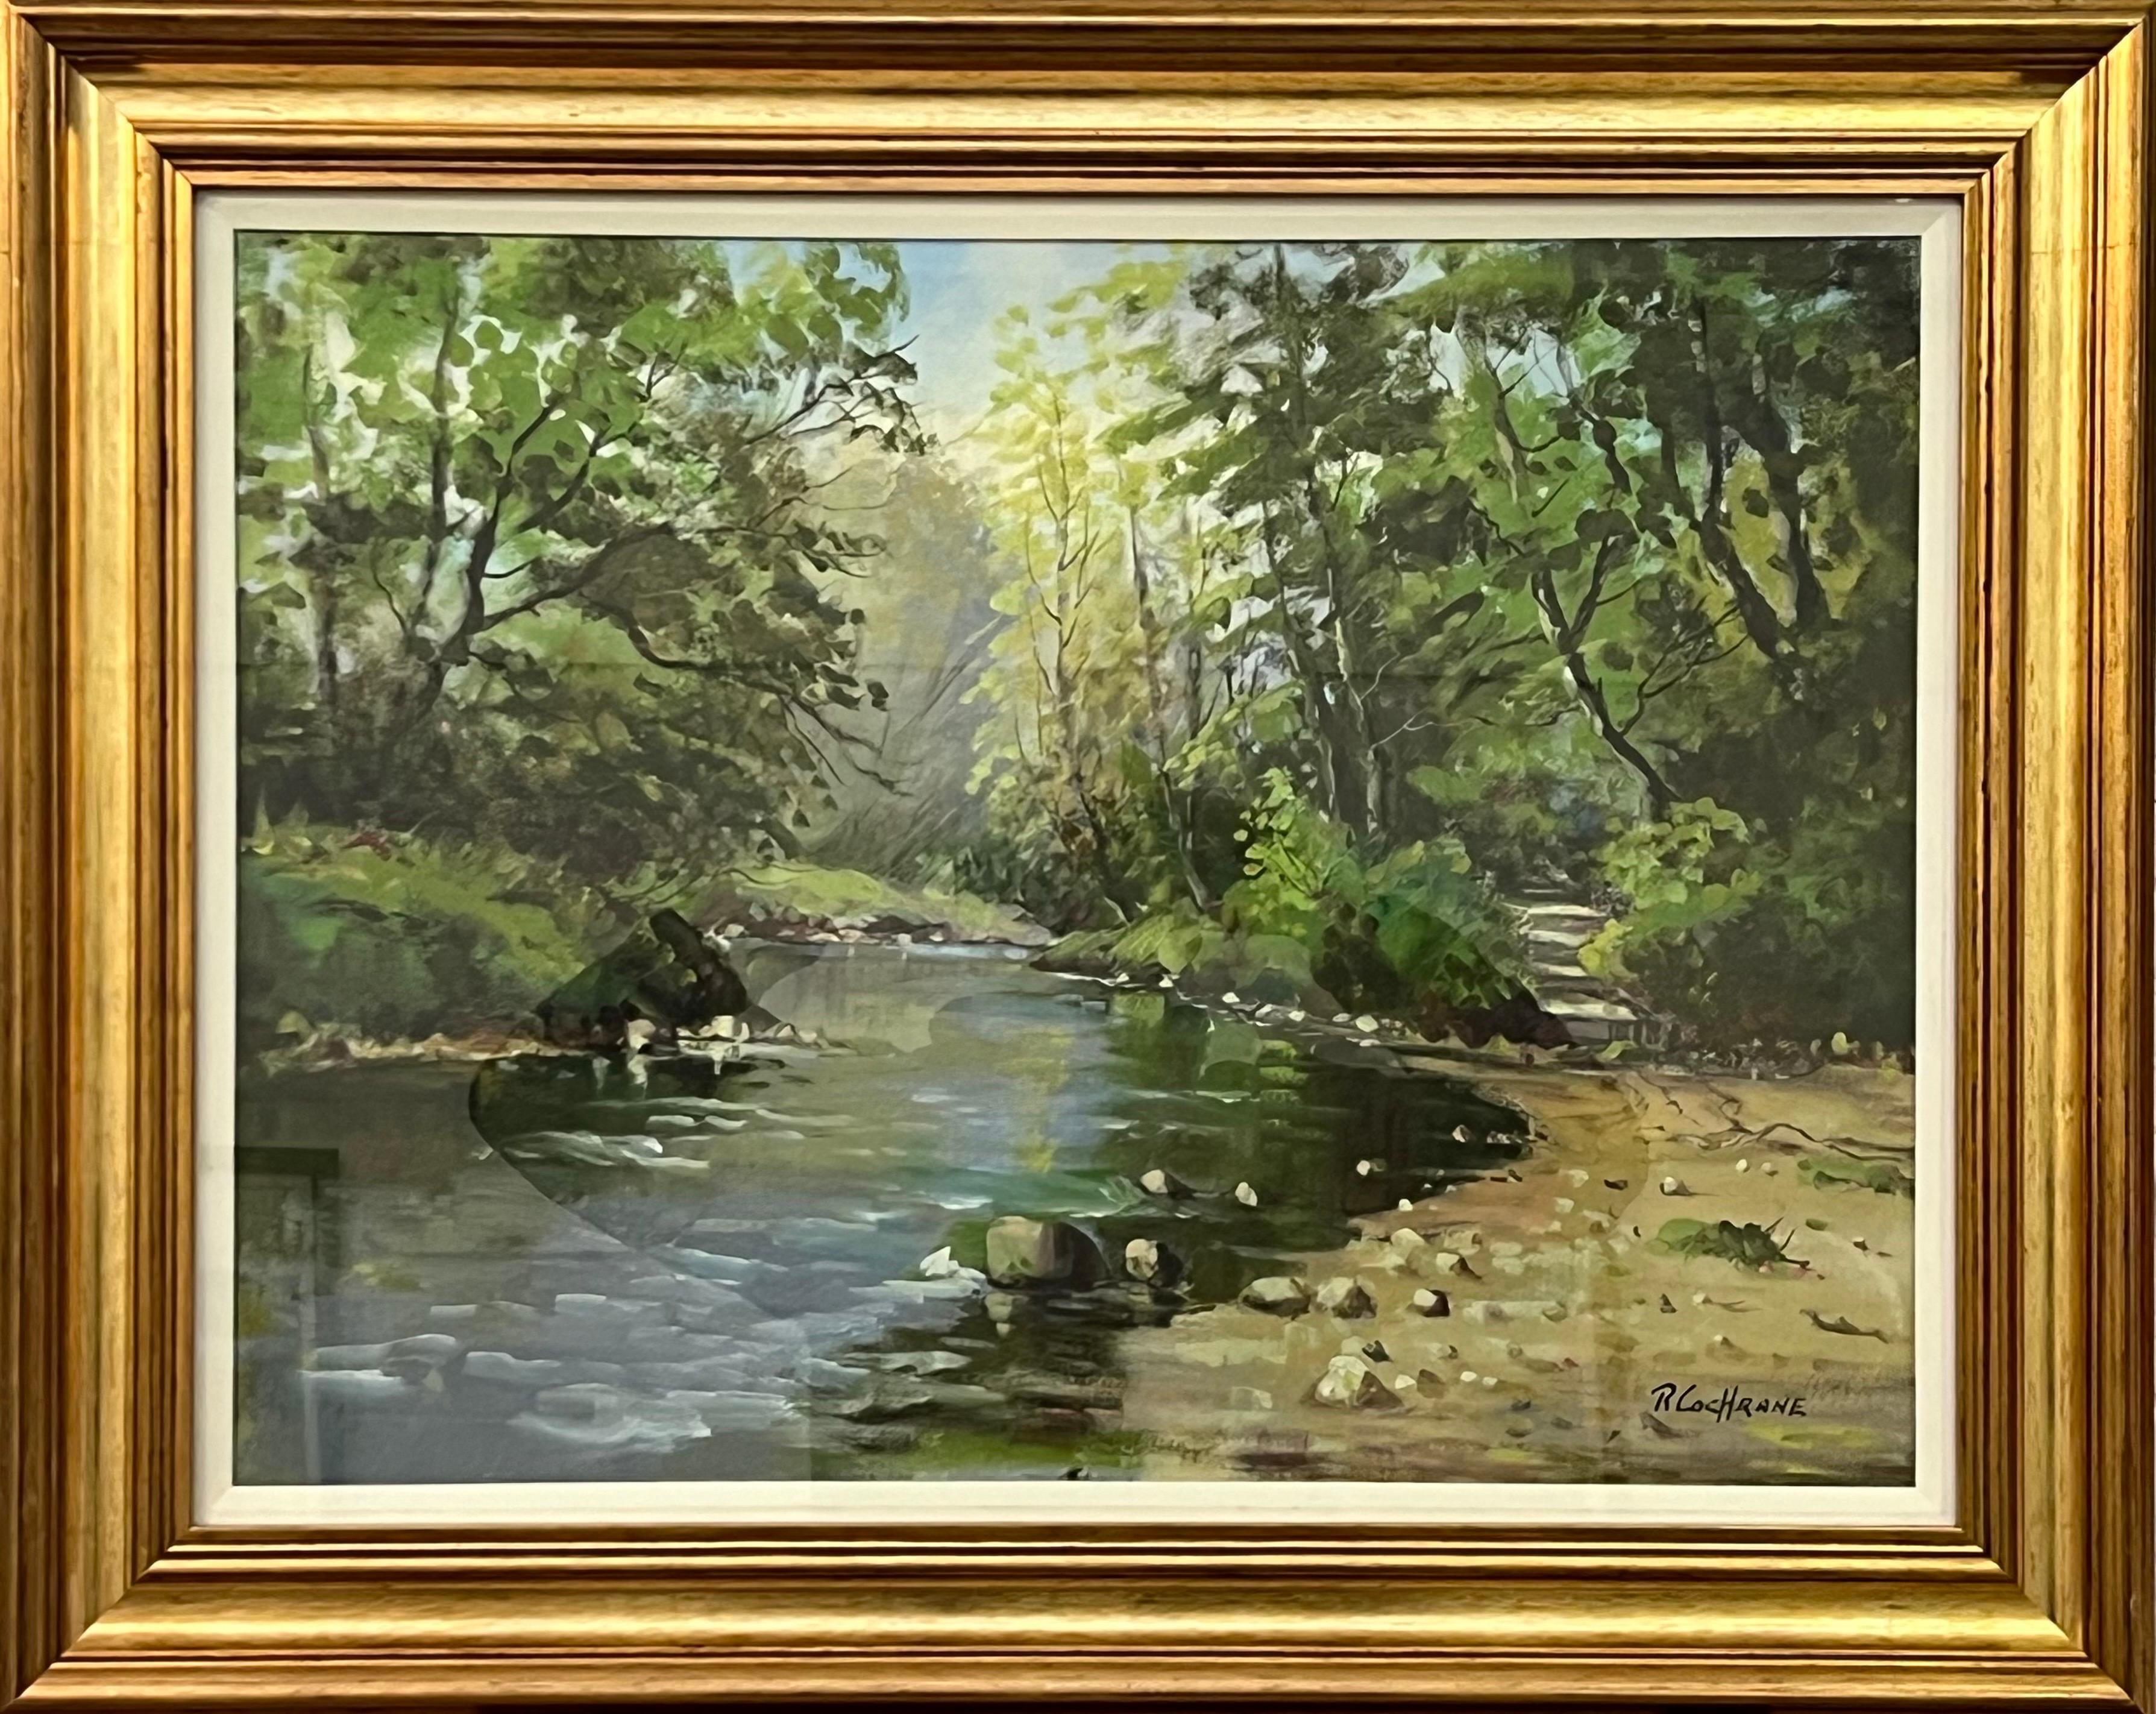 Ray Cochrane Landscape Painting - Vintage Post-Impressionist Painting of Tree-Lined River in the Irish Countryside